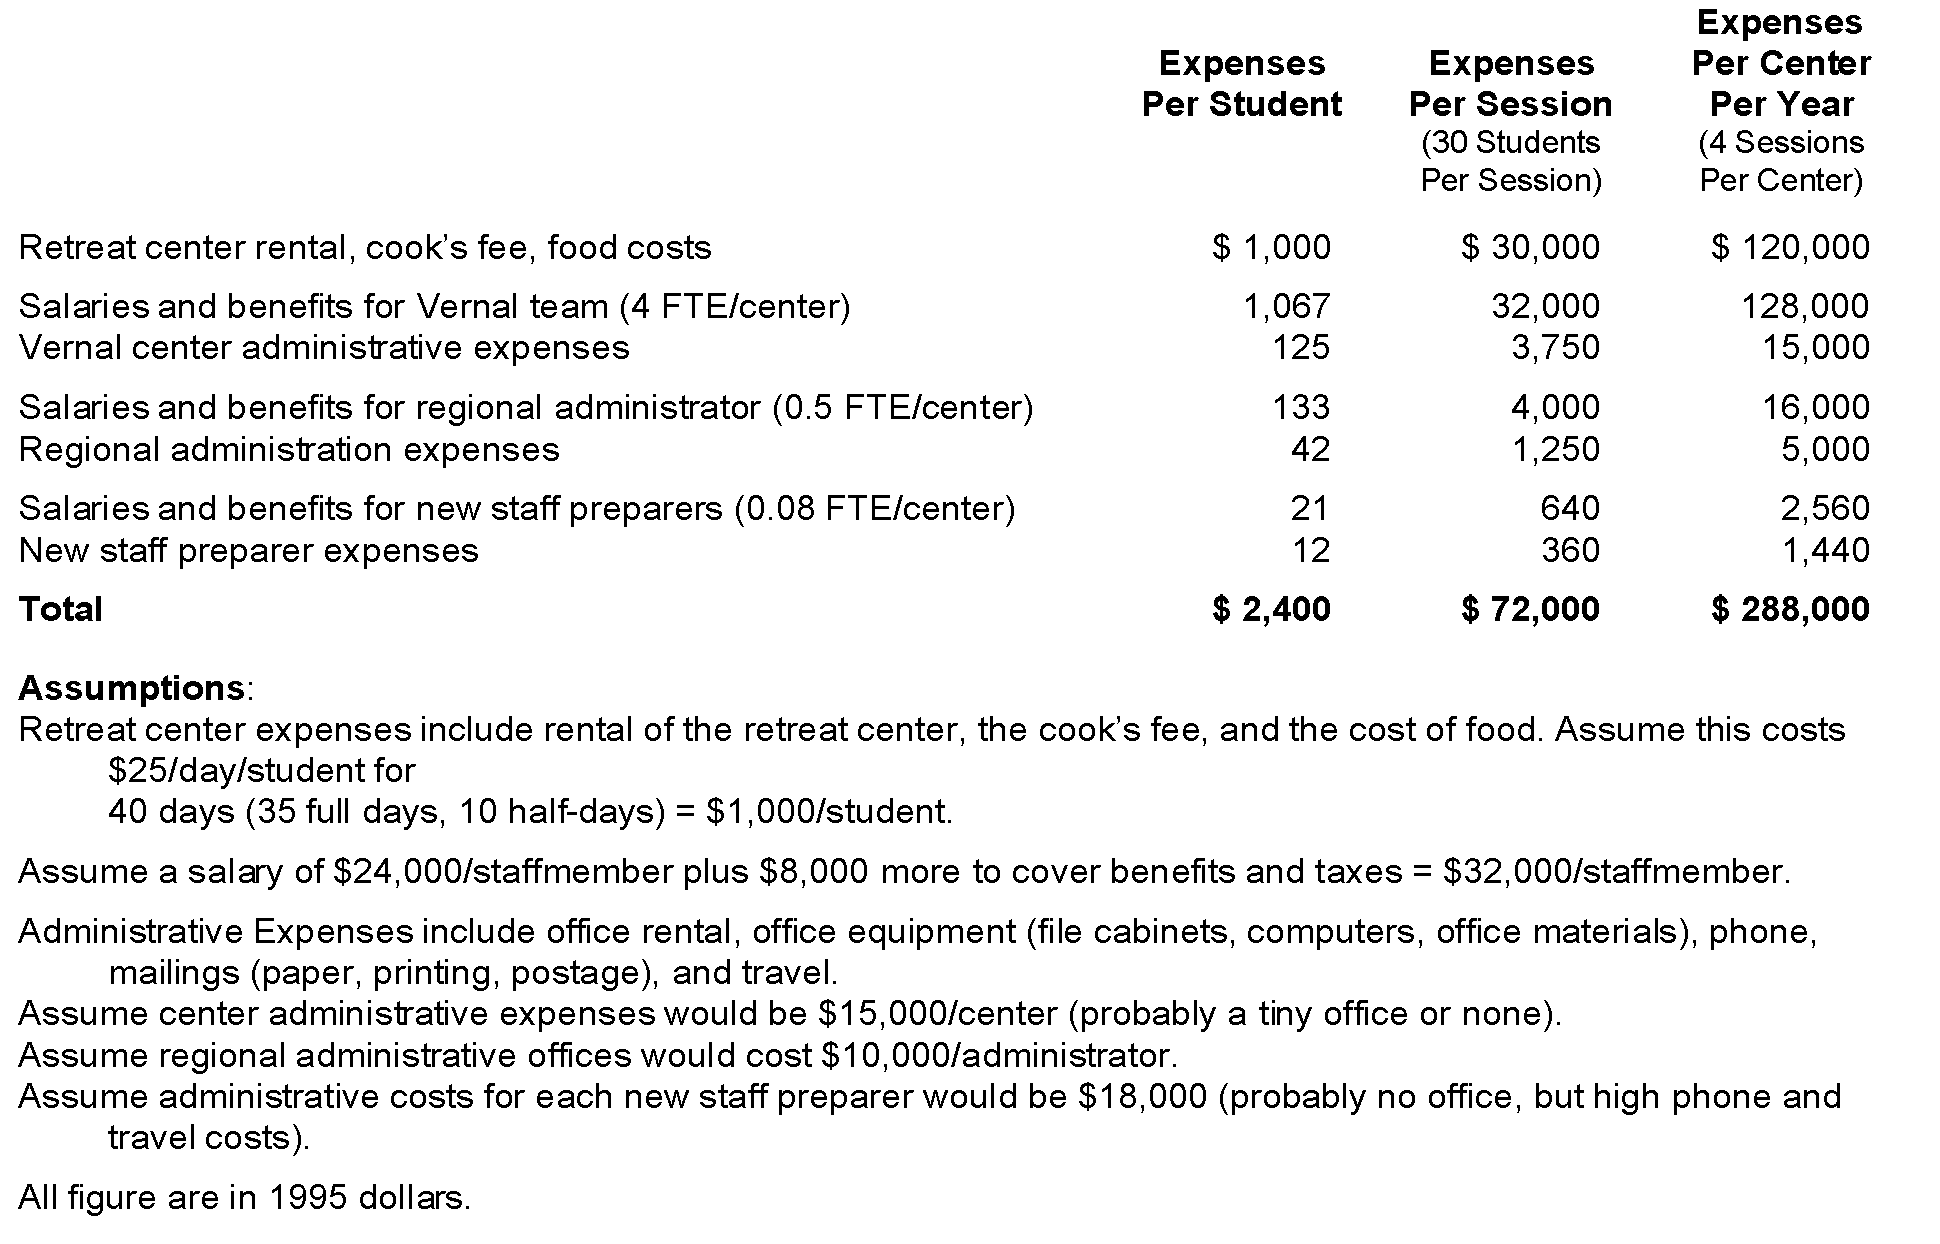 Possible Expenses for the Vernal Education Program